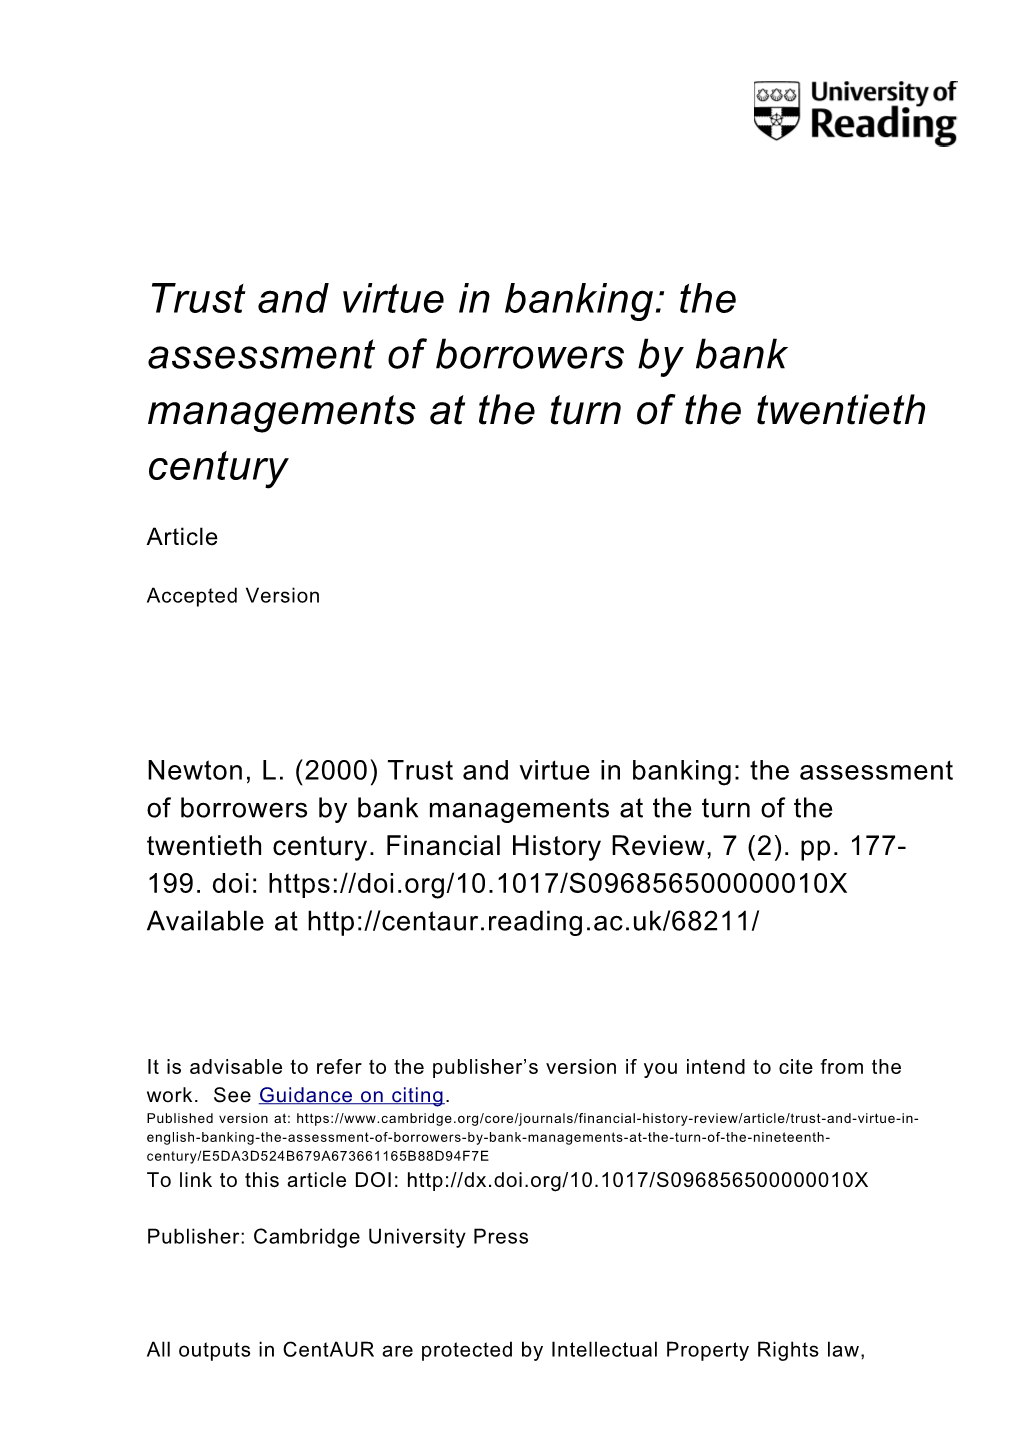 The Assessment of Borrowers by Bank Managements at the Turn of the Twentieth Century